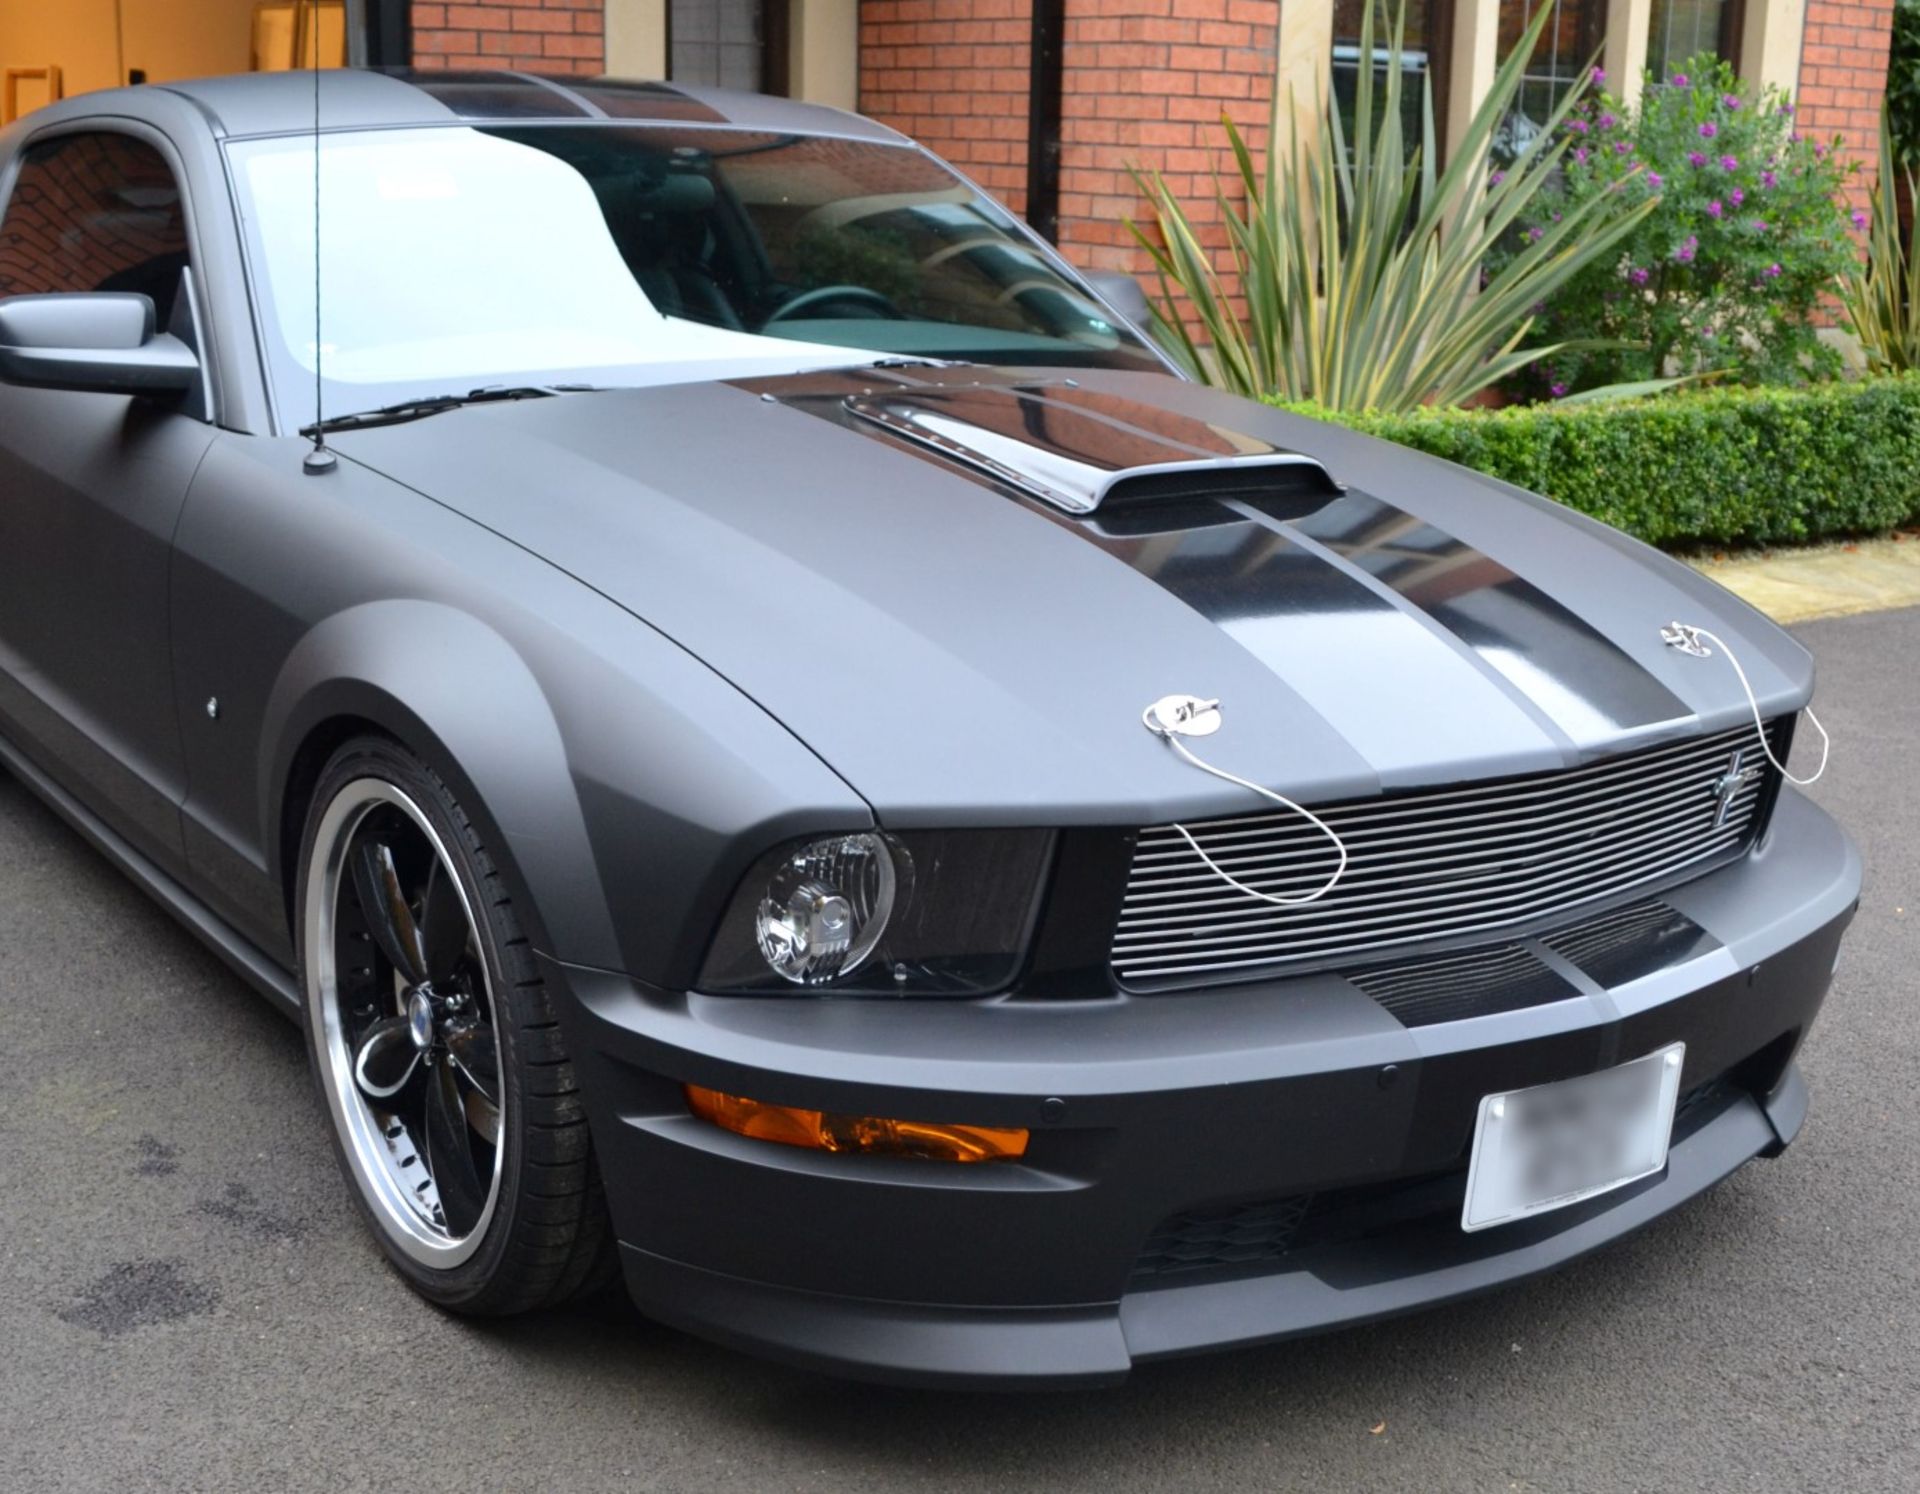 Limited Edition Supercharged 2008 Shelby Ford Mustang GT-C - 2136 Miles - No VAT on the hammer - Image 60 of 64